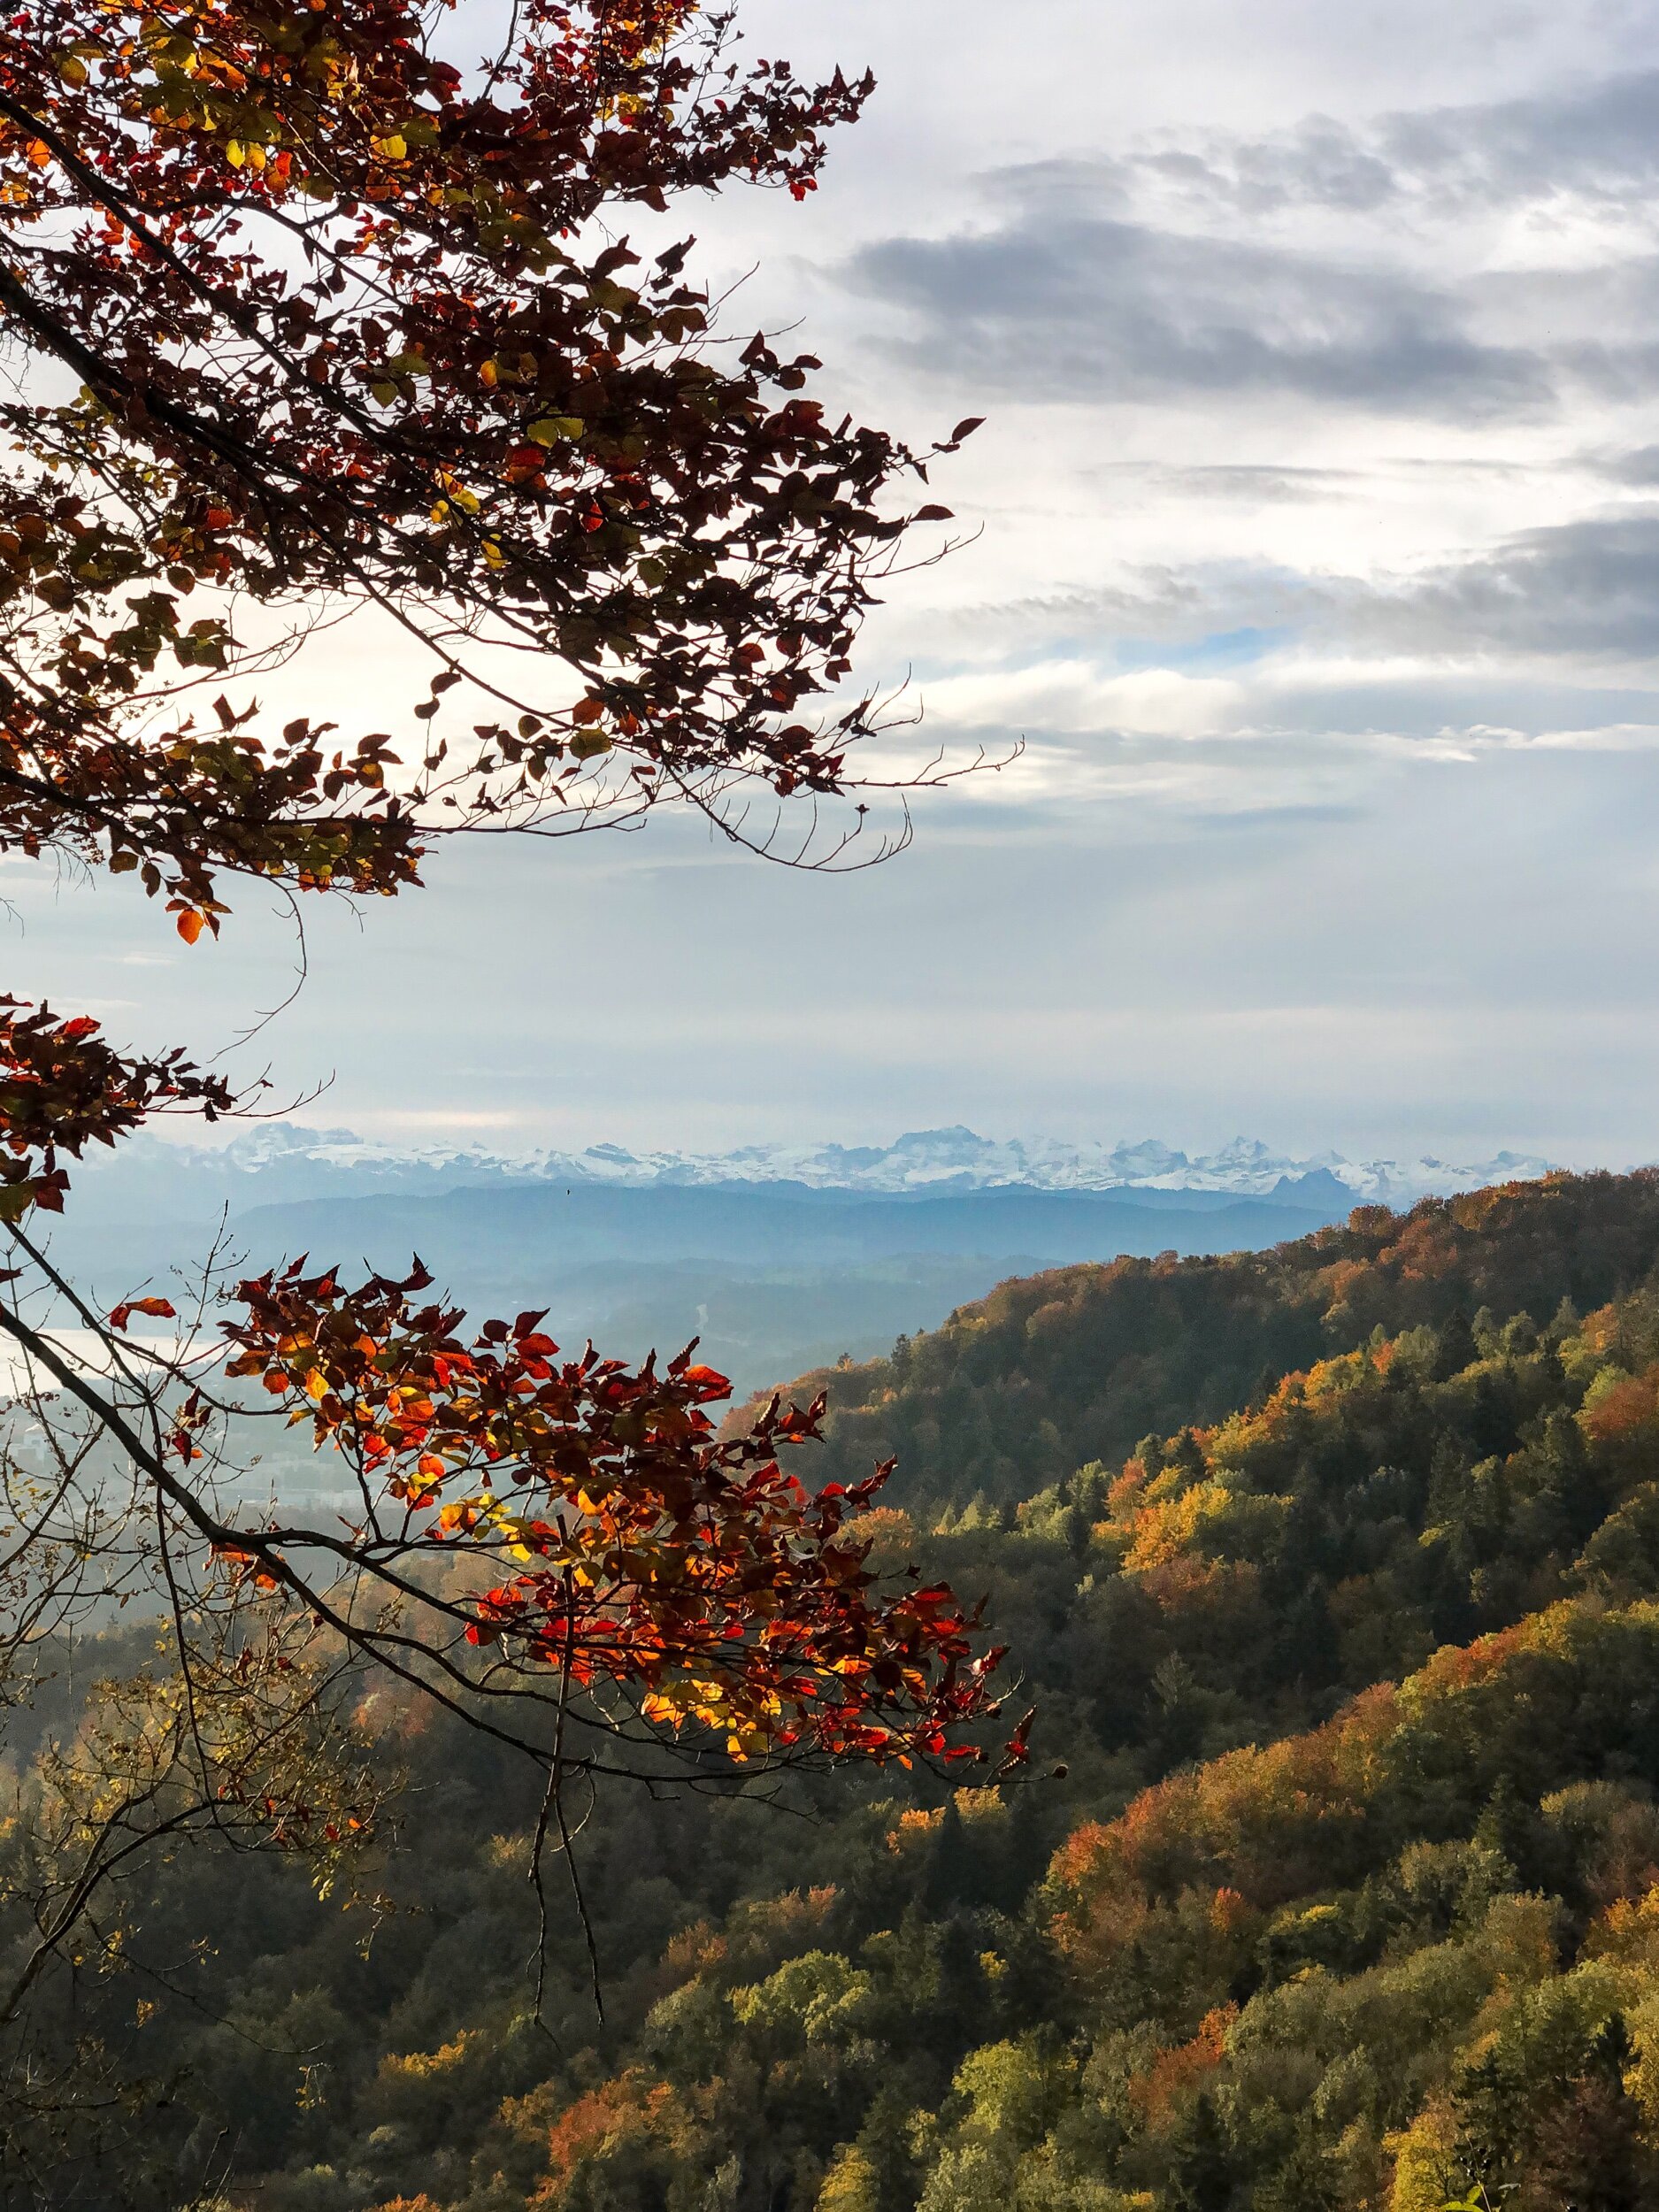 Fall colors over Uetliberg with view of Alps in Zurich Switzerland